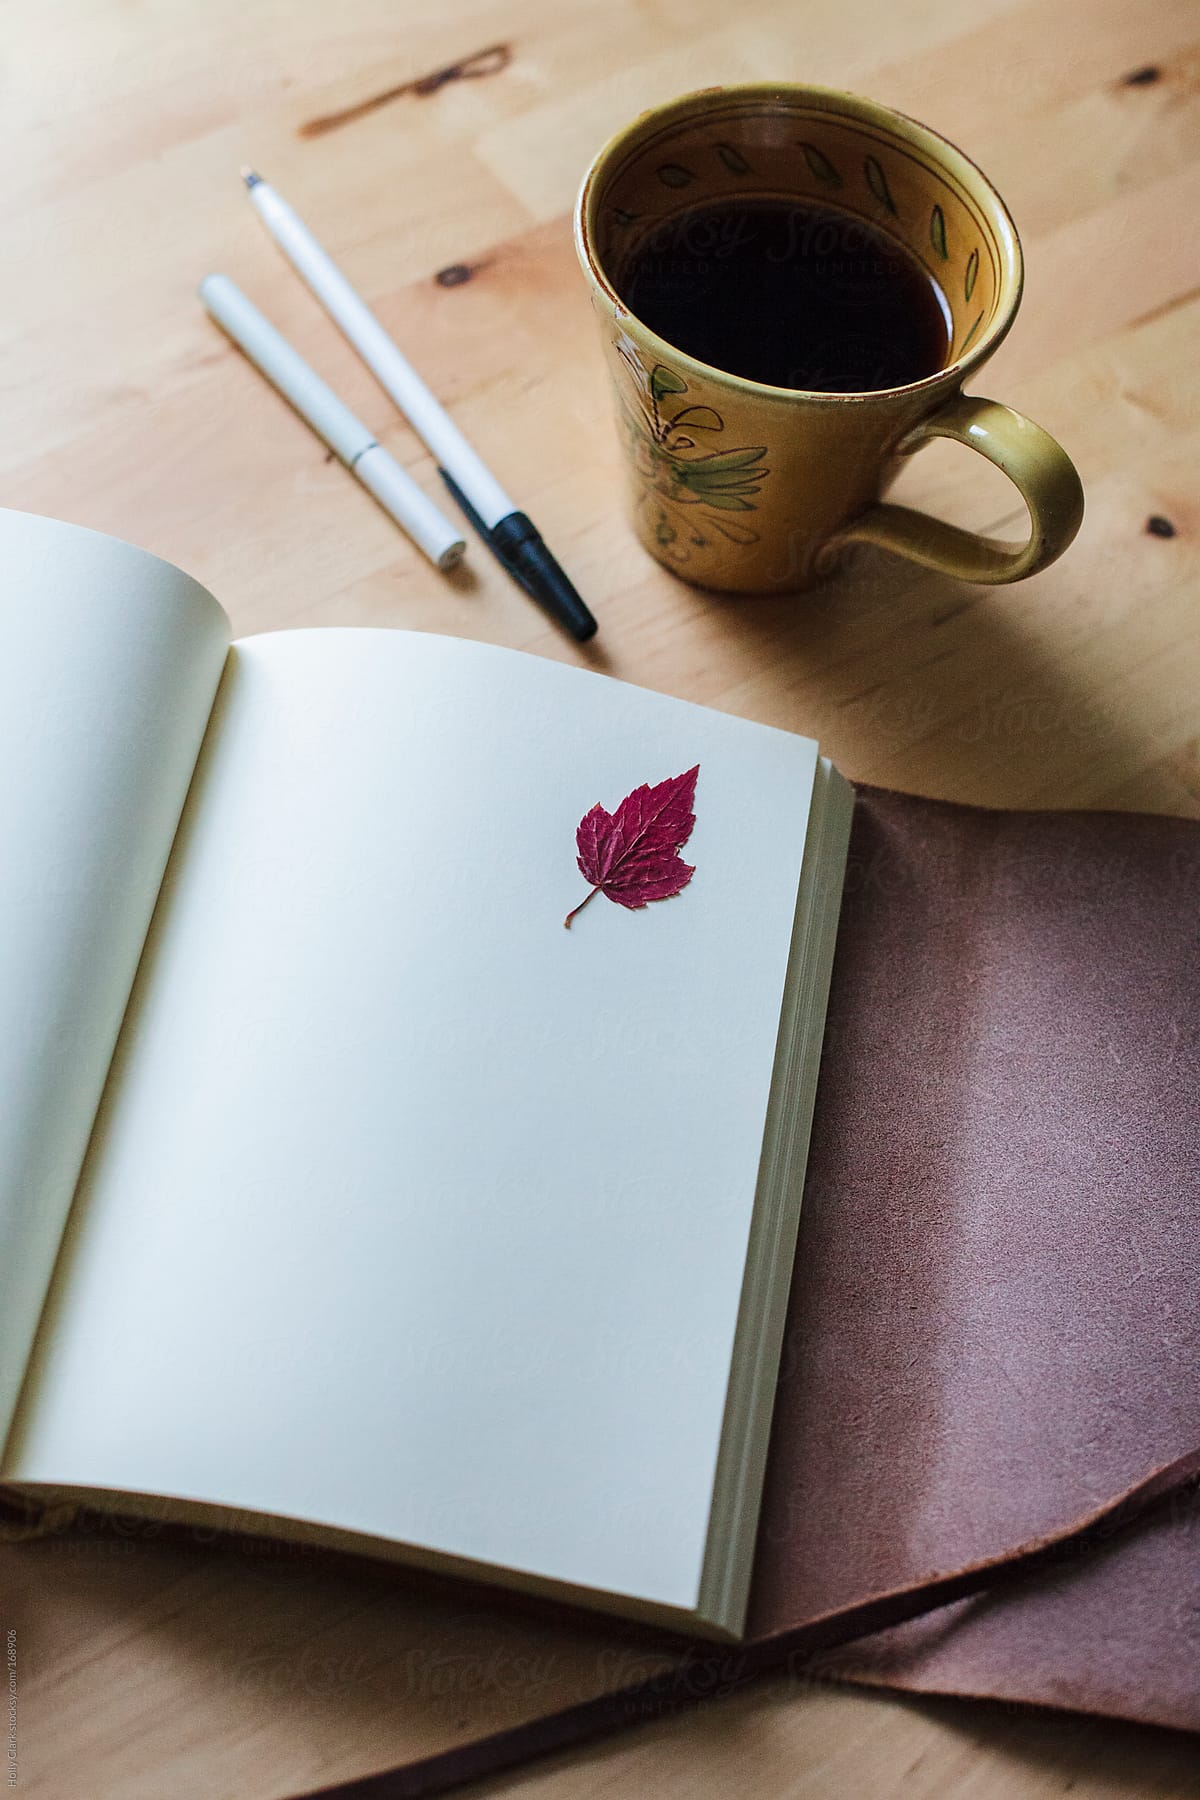 Journal page with red leaf on table next to cup of coffee